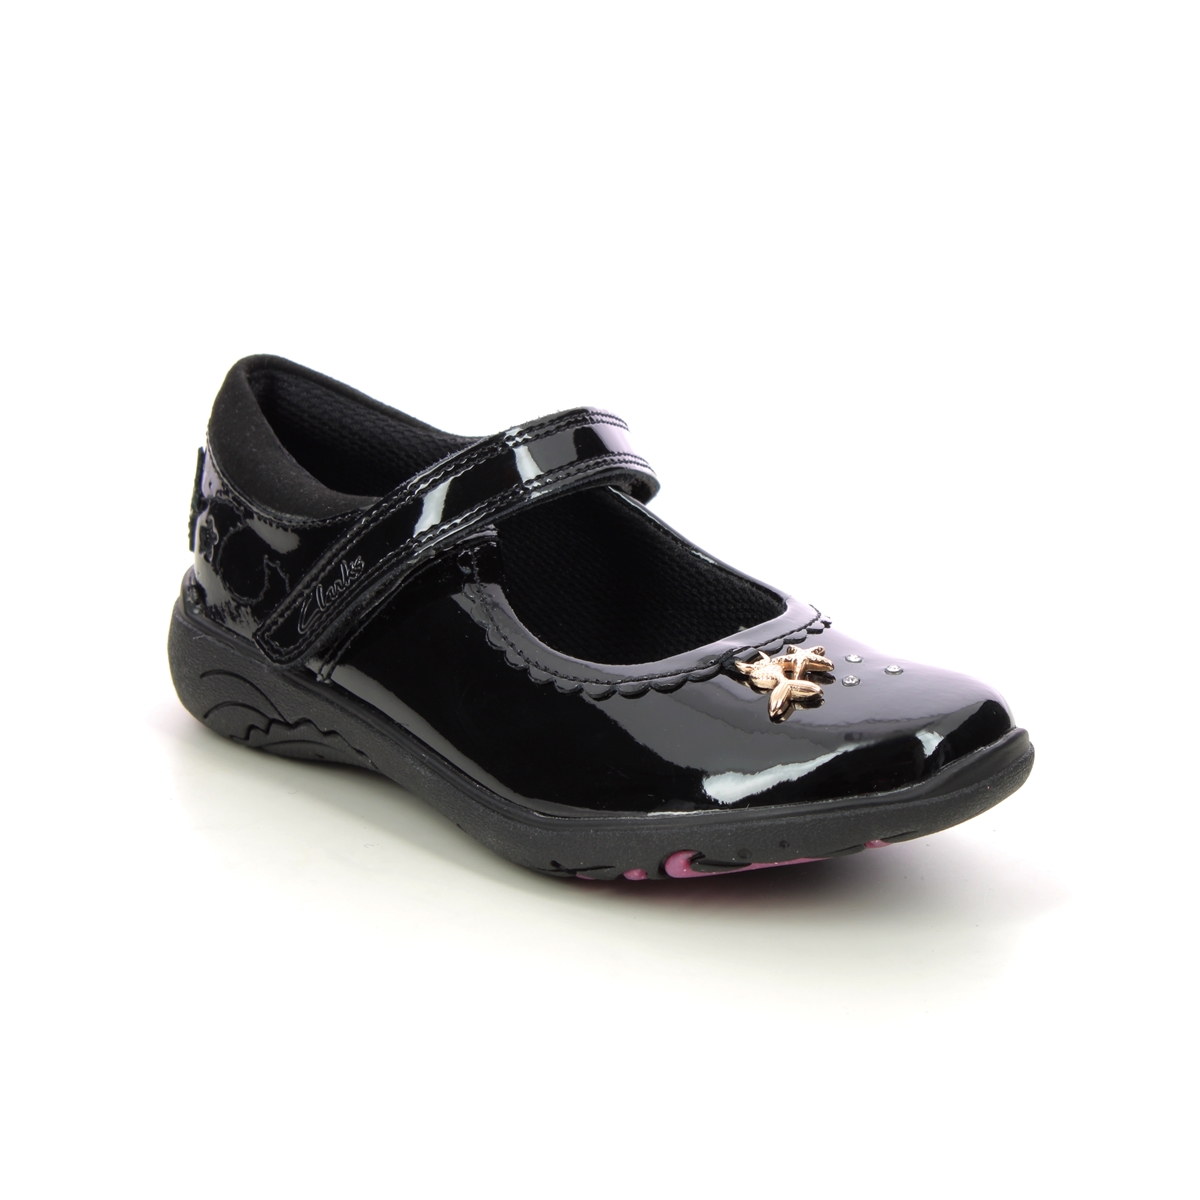 Clarks Relda Sea K Mary Jane Black patent Kids girls school shoes 7224-15E in a Plain Leather in Size 8.5